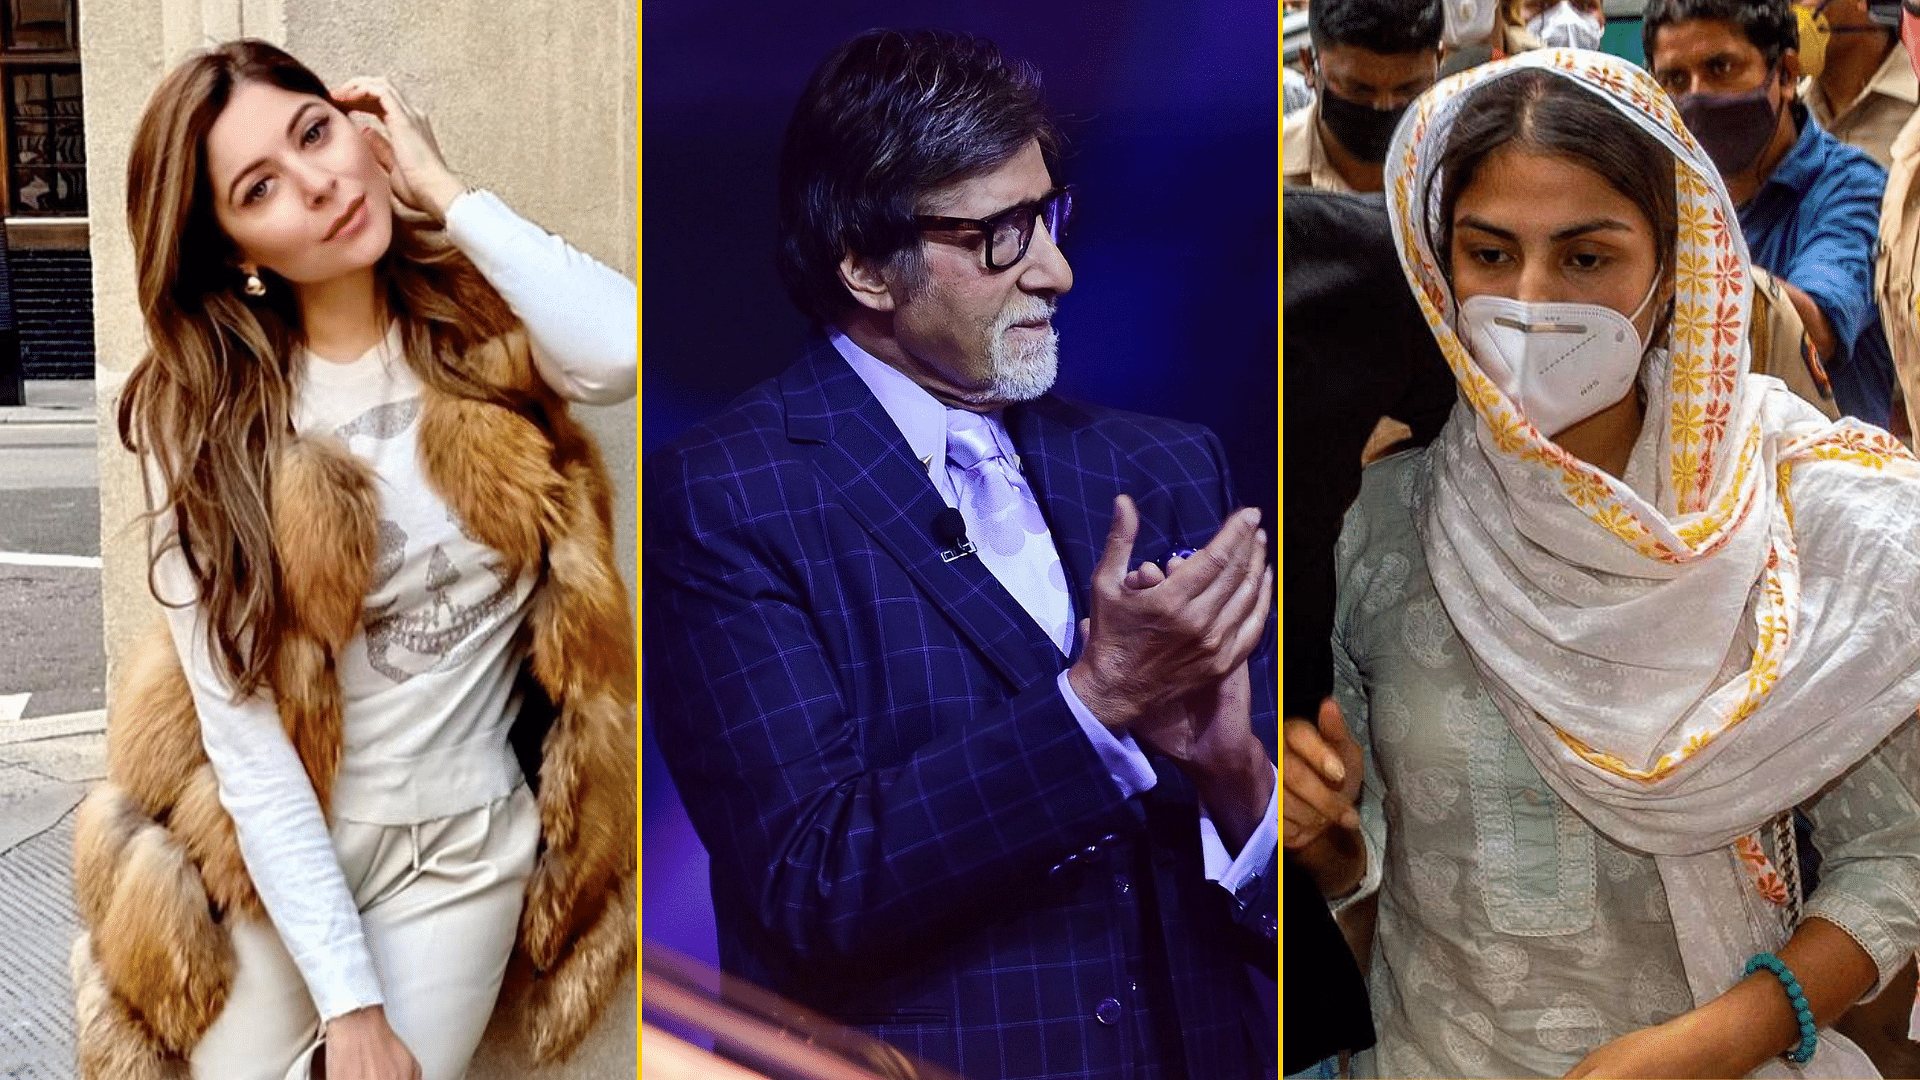 Kanika Kapoor, Amitabh Bachchan and Rhea Chakraborty were among the most searched personalities in 2020 according to a Google India report.